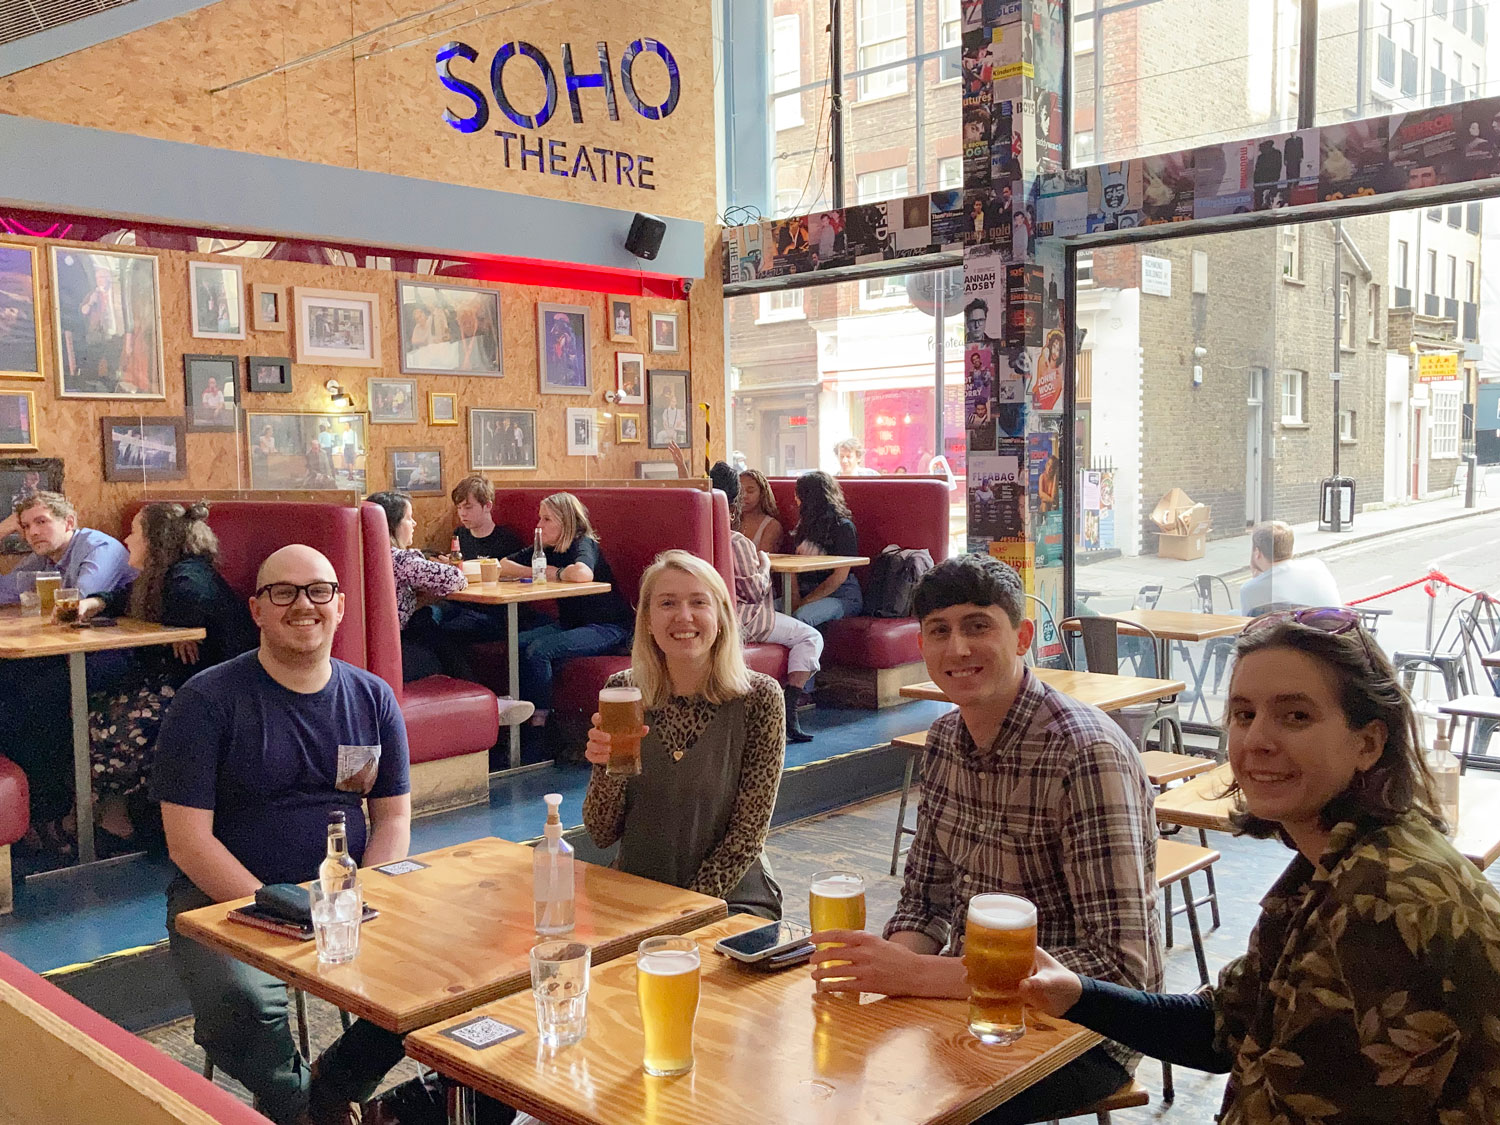 The Cog team tuck into their first drink at the Soho Theatre bar